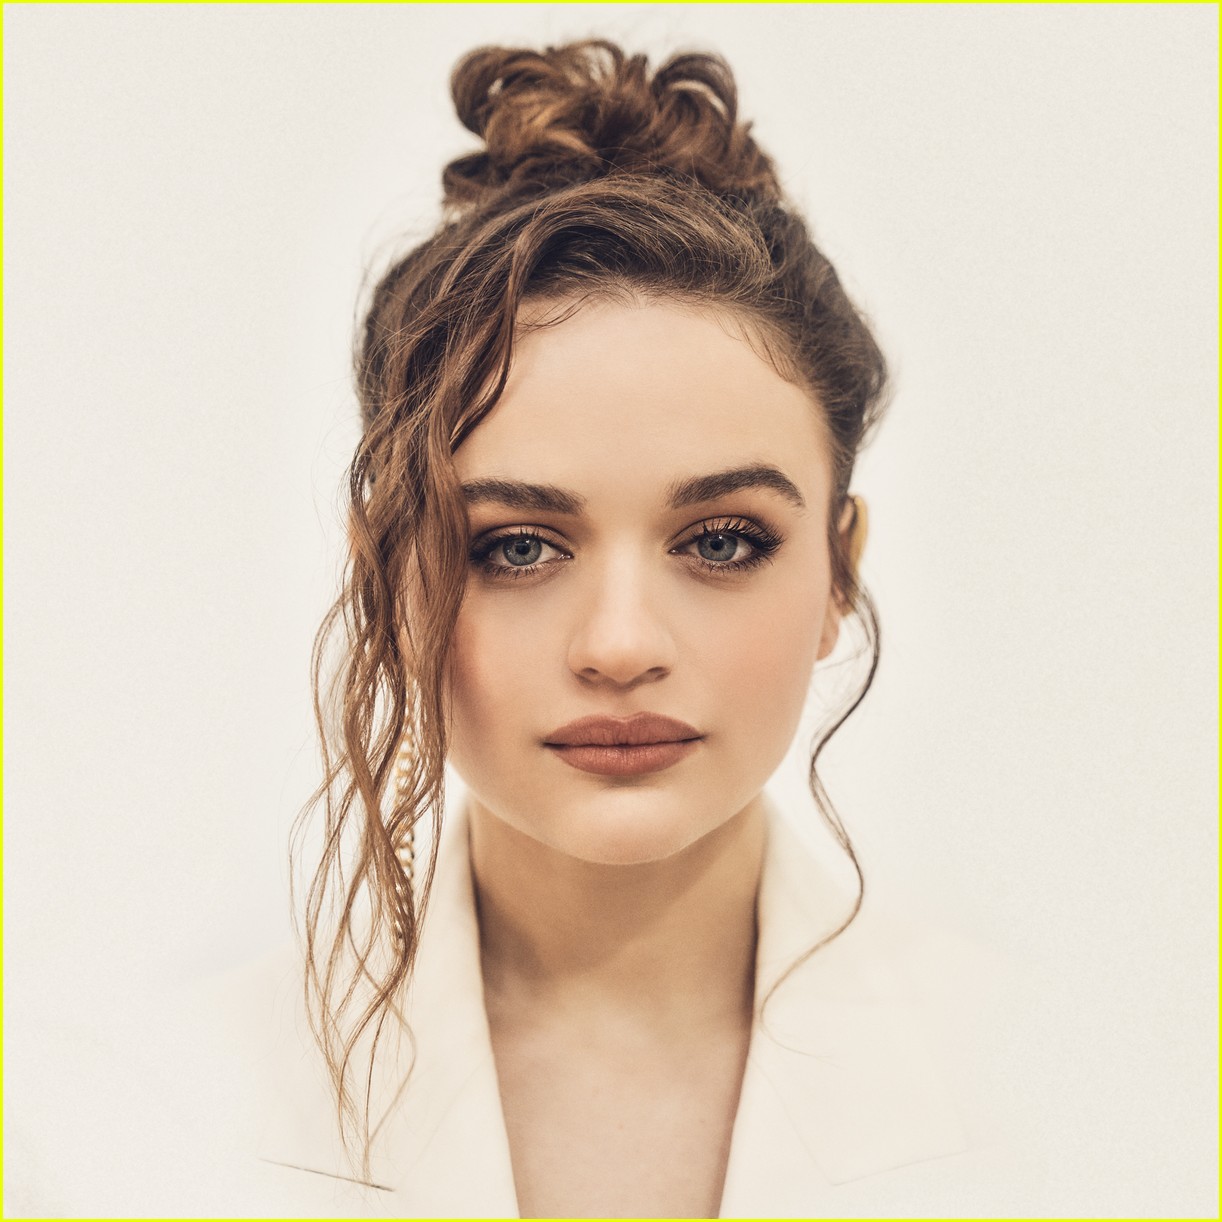 joey king says this is what led to her becoming a producer 05